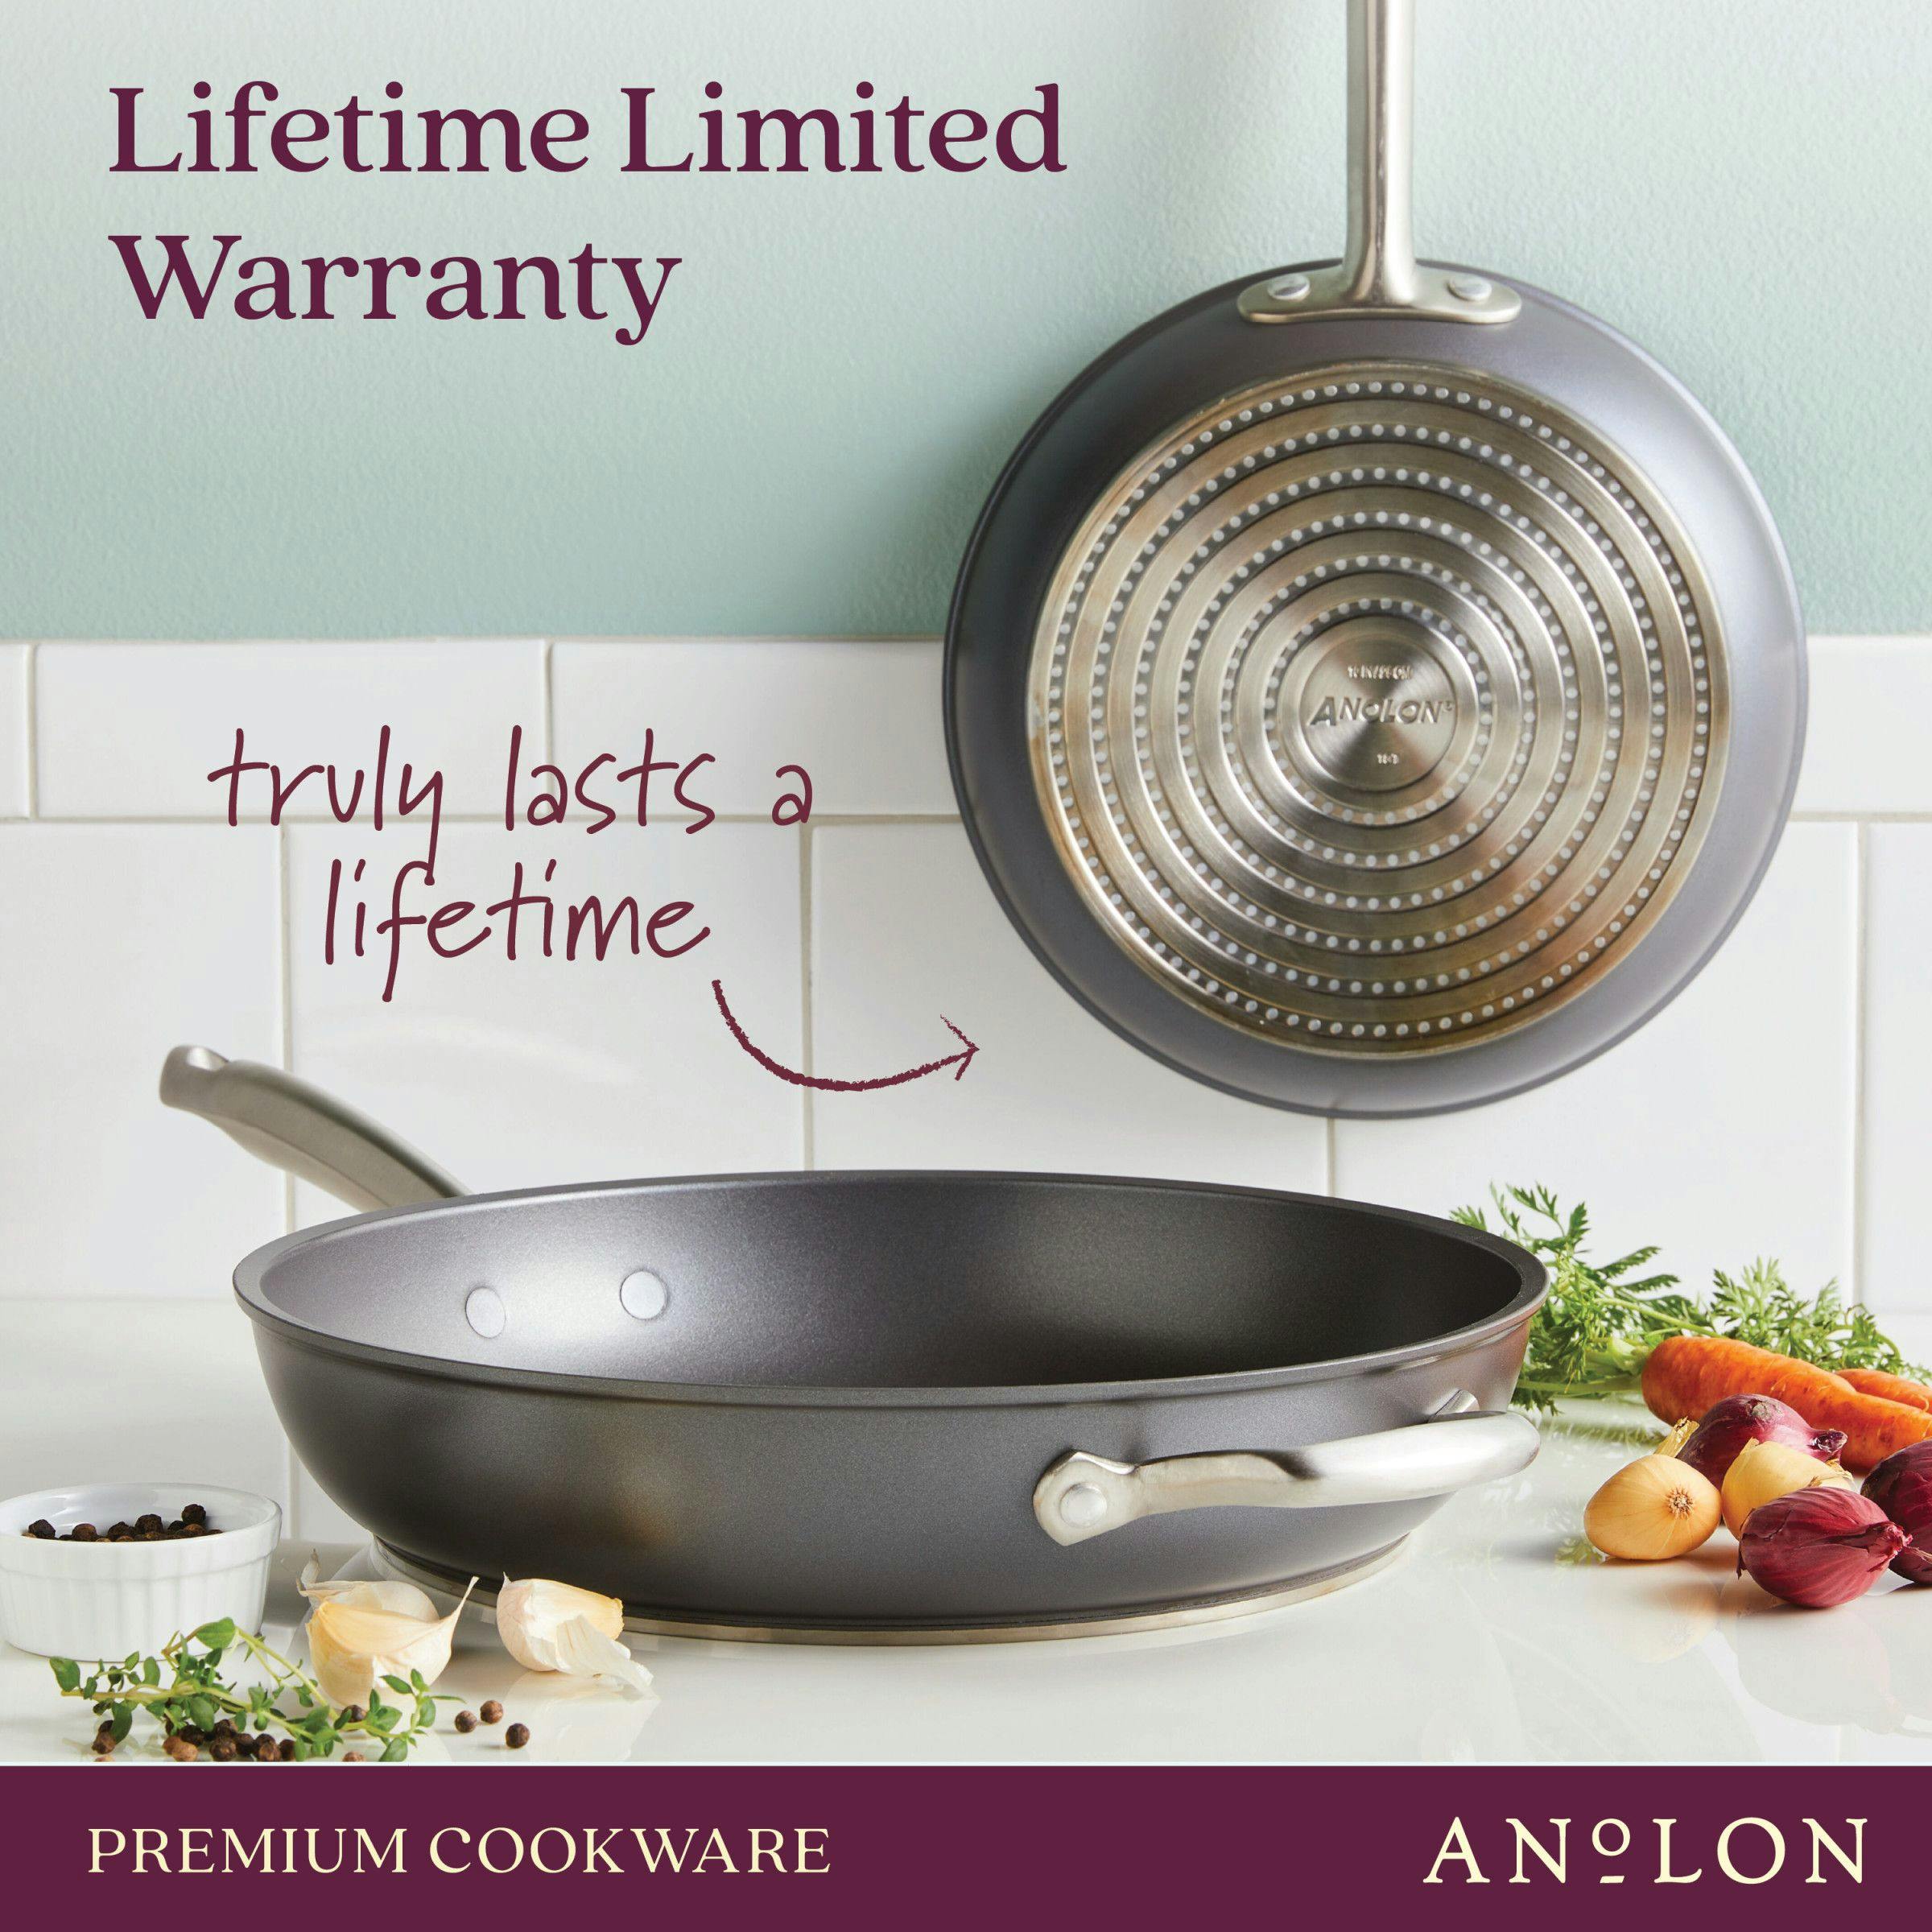 Anolon Accolade Hard Anodized Nonstick Cookware Induction Pots and Pans Set, 10-Piece, Gray